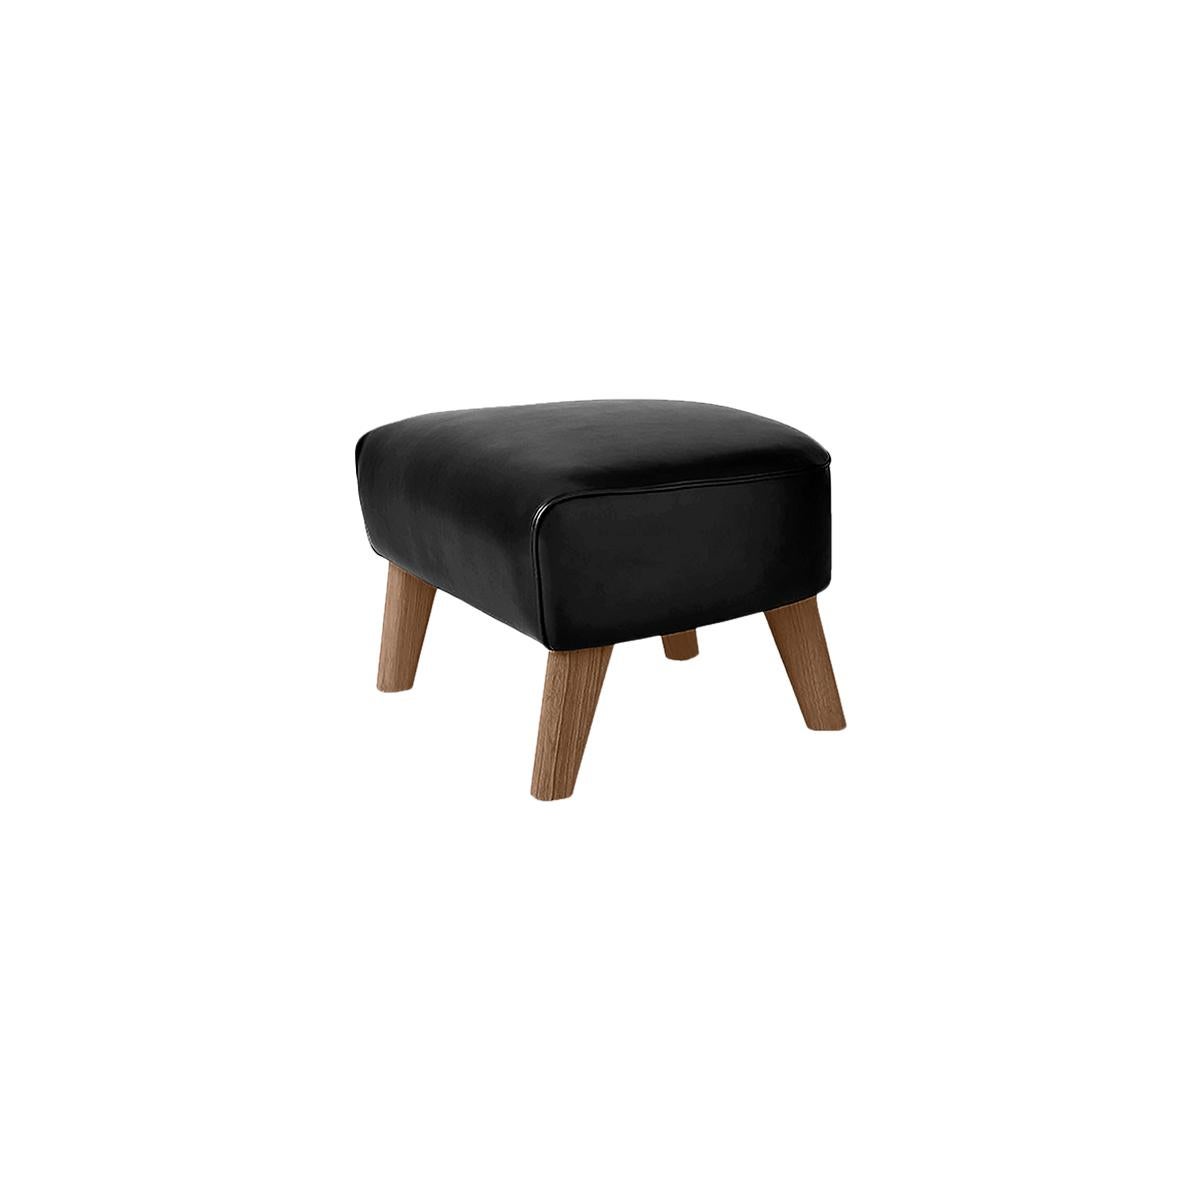 Black leather and smoked oak my own chair footstool by Lassen.
Dimensions: W 56 x D 58 x H 40 cm.
Materials: leather.

The my own chair footstool has been designed in the same spirit as Flemming Lassen’s original iconic chair, reflecting his